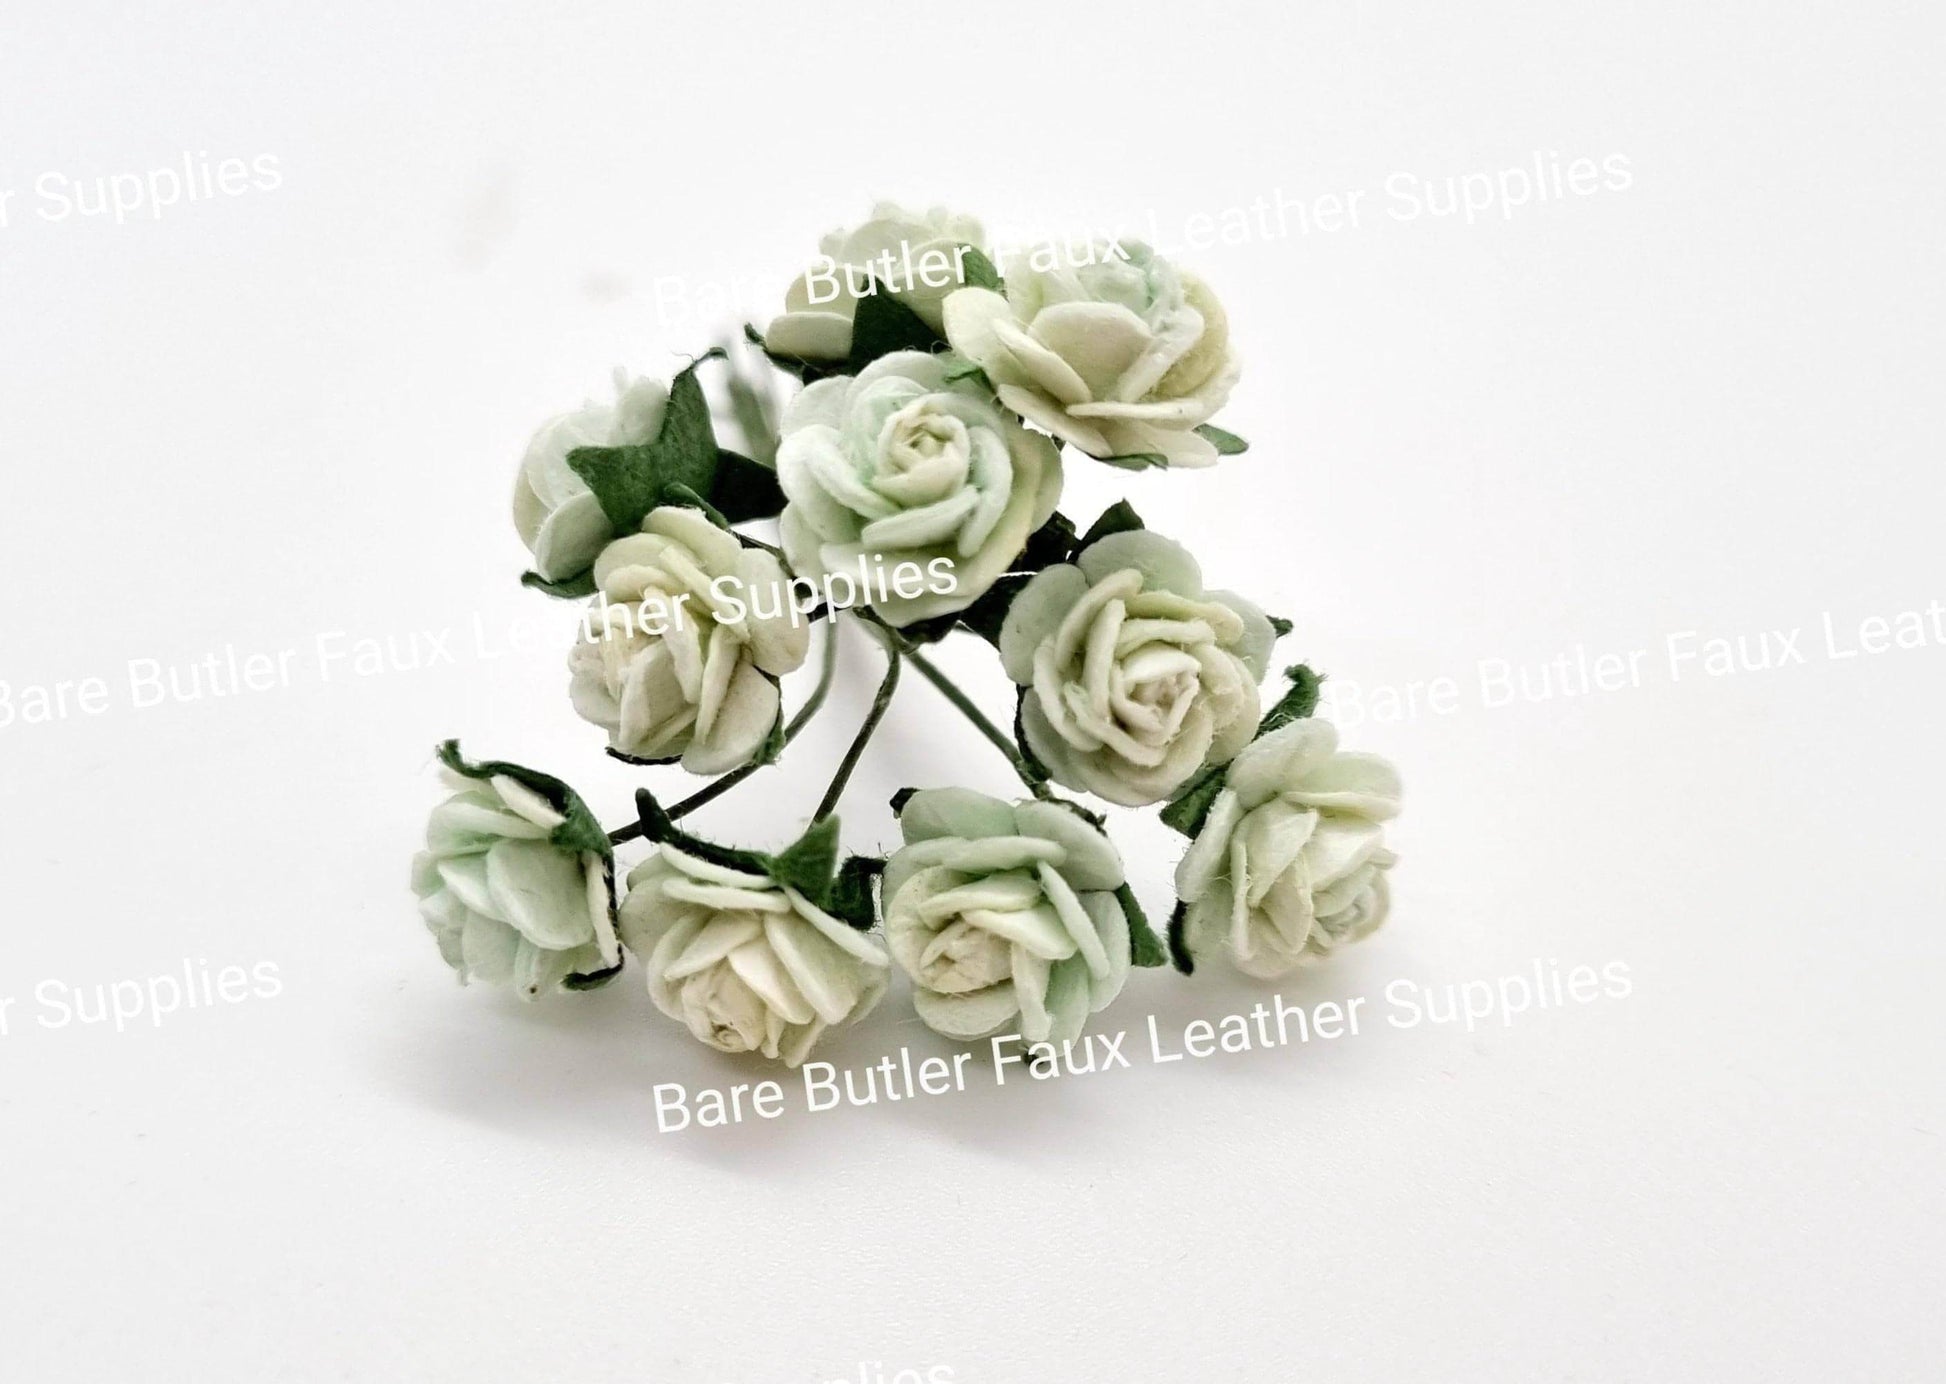 Mini Roses Mint 10 Pack - Embelishment, Flower, mint, Mulburry, mullberry, rose - Bare Butler Faux Leather Supplies 